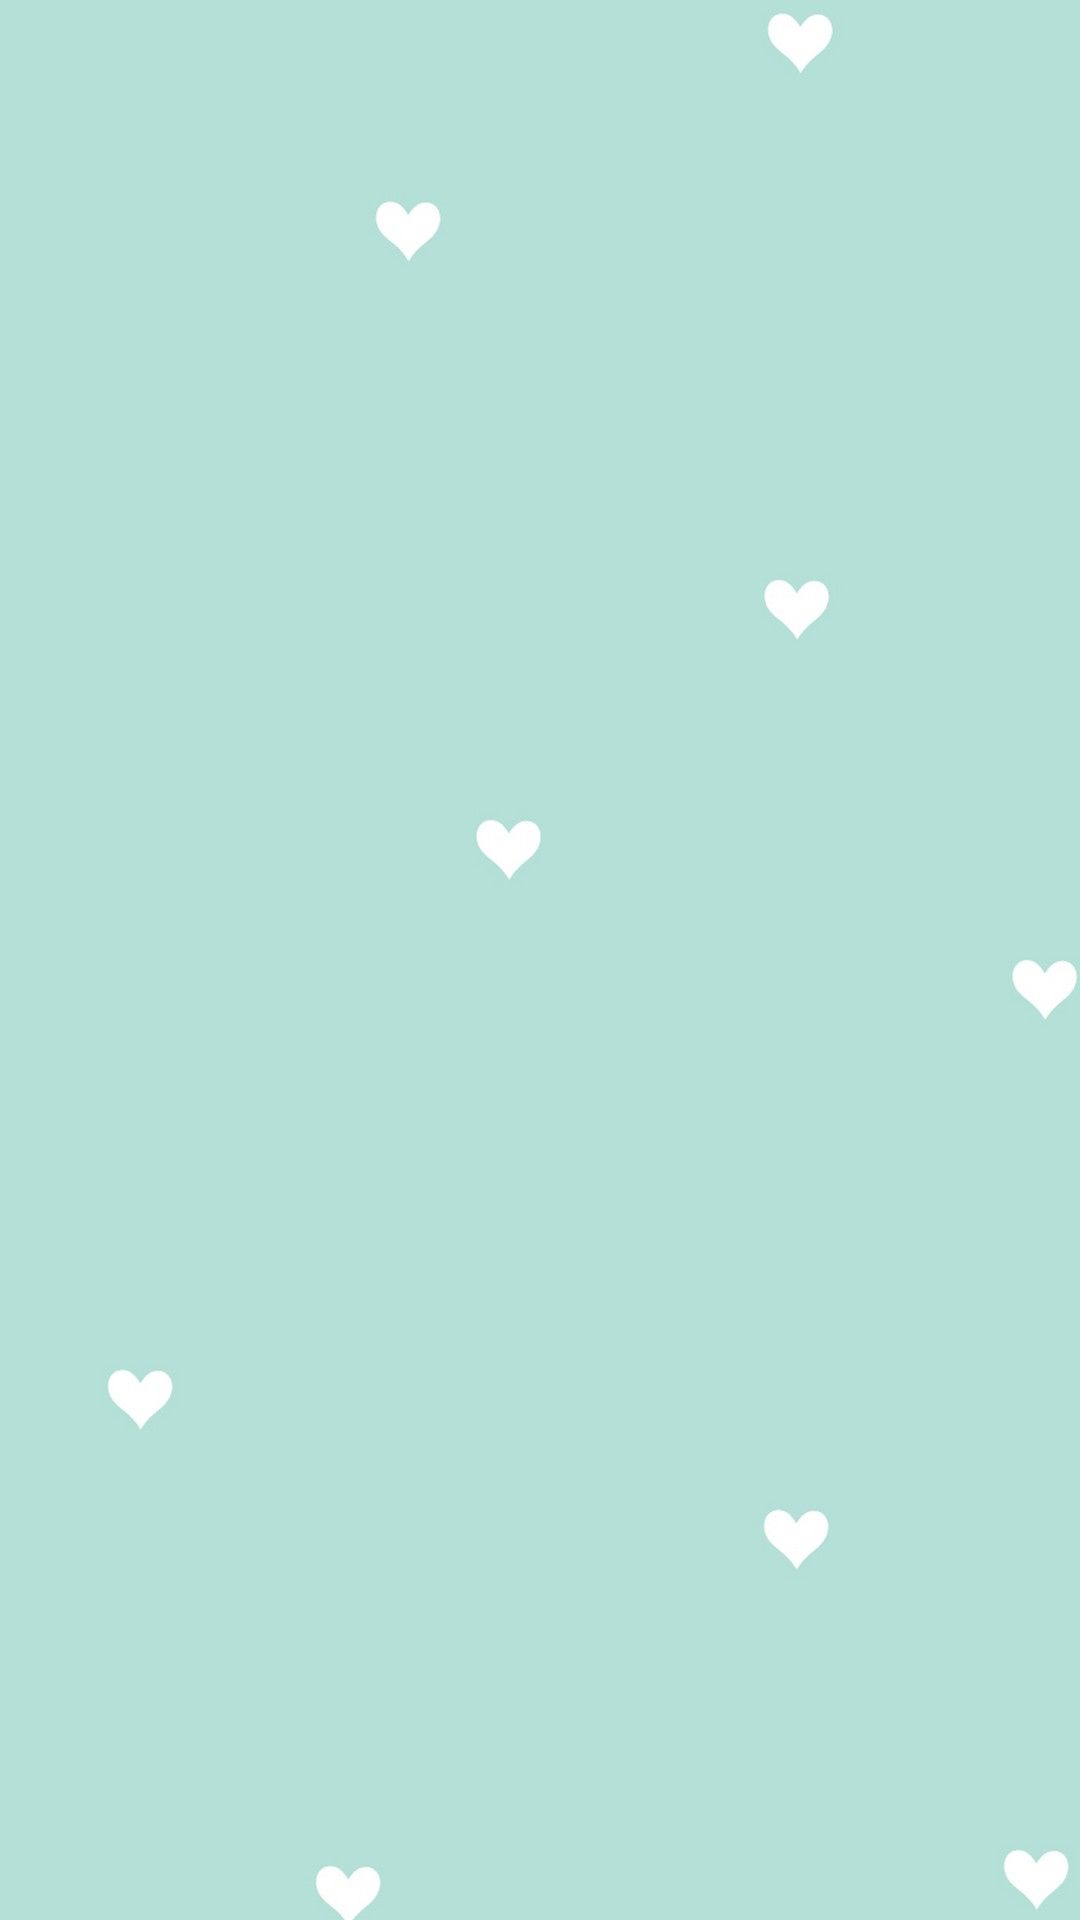 Mint Green HD Wallpaper For Android Mobile Wallpaper. Mint green wallpaper, Green wallpaper, Mint green wallpaper iphone